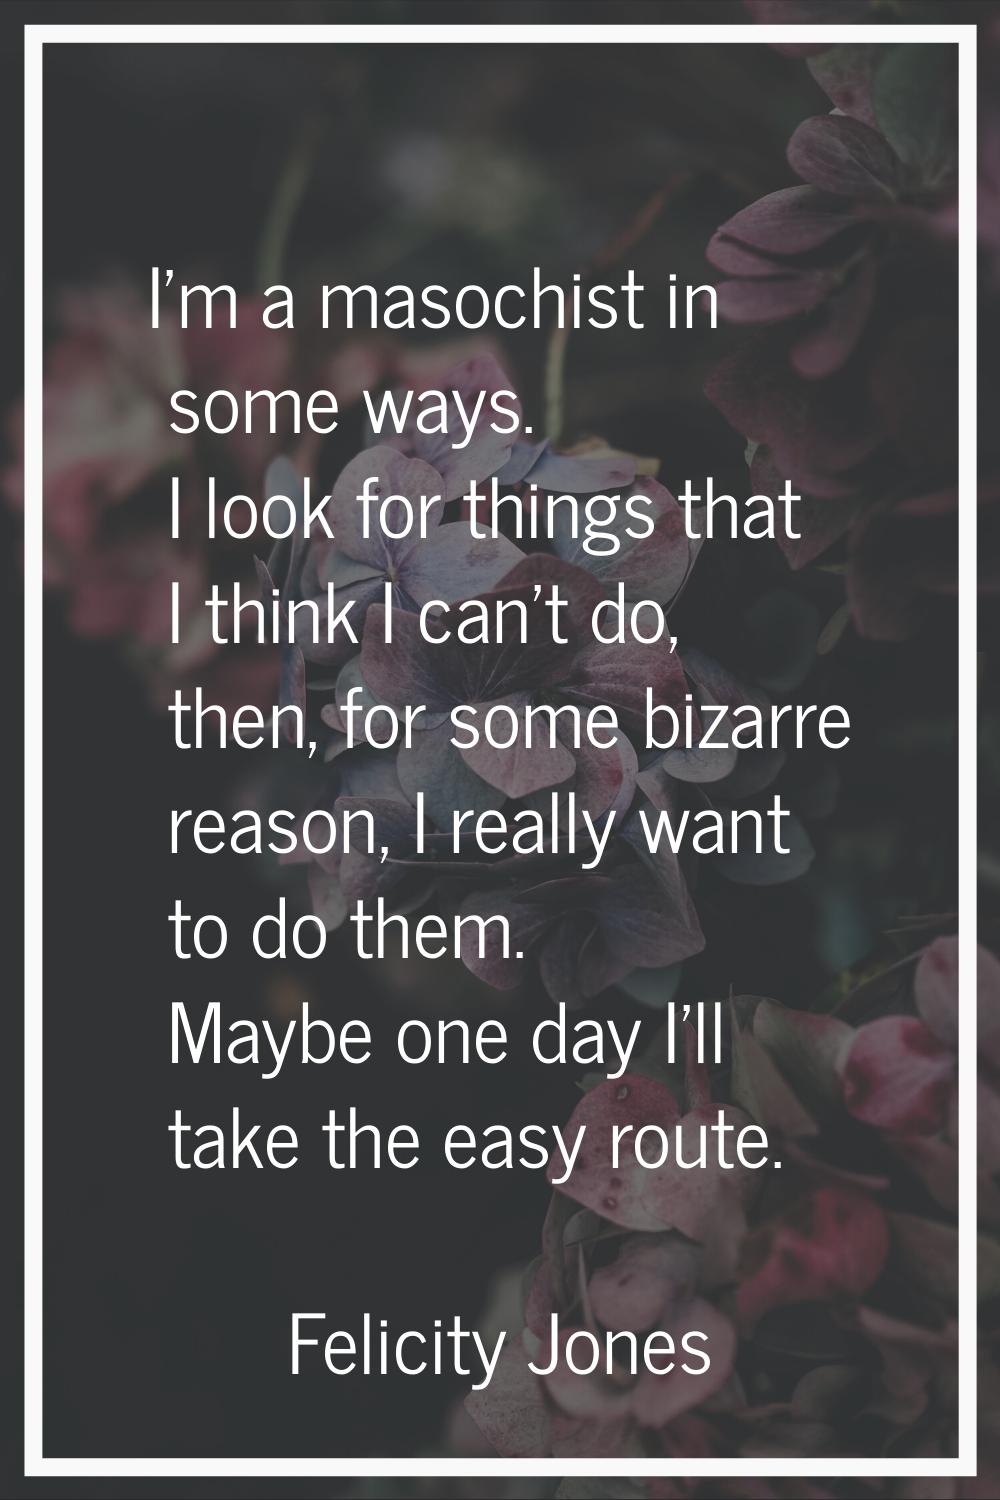 I'm a masochist in some ways. I look for things that I think I can't do, then, for some bizarre rea